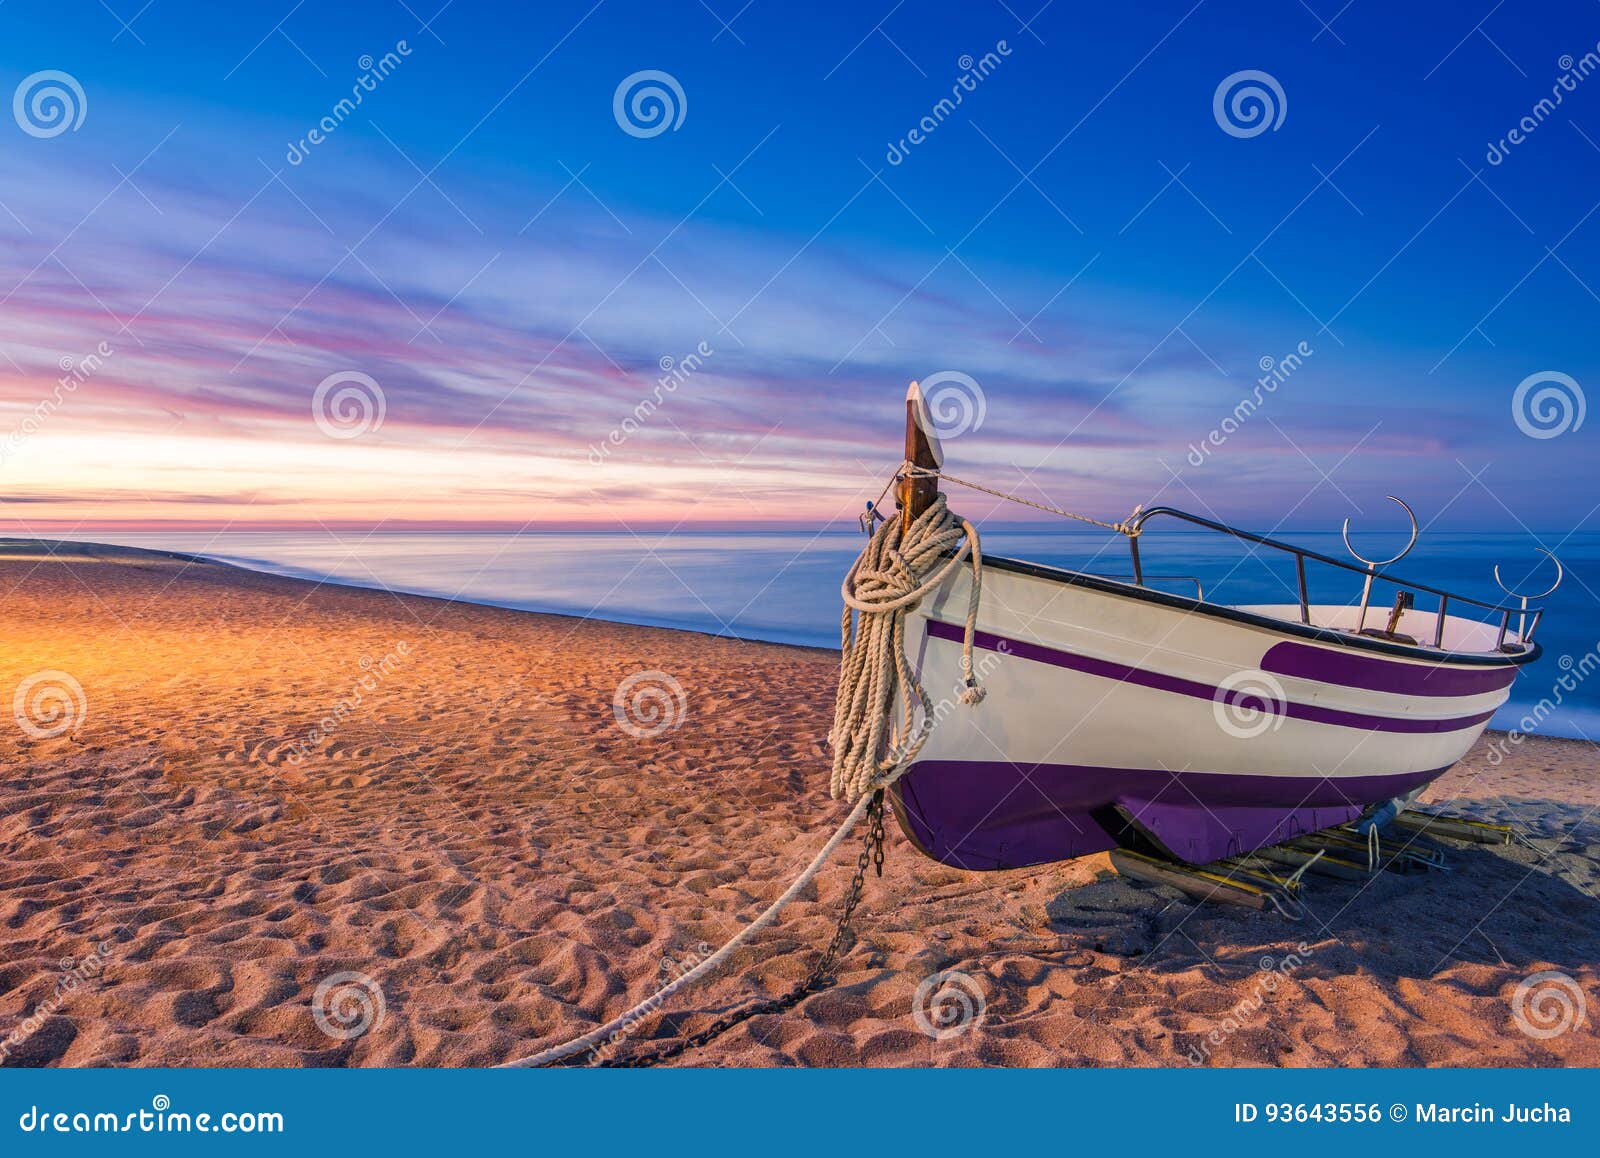 old wooden fishing boat on beach at sunrise